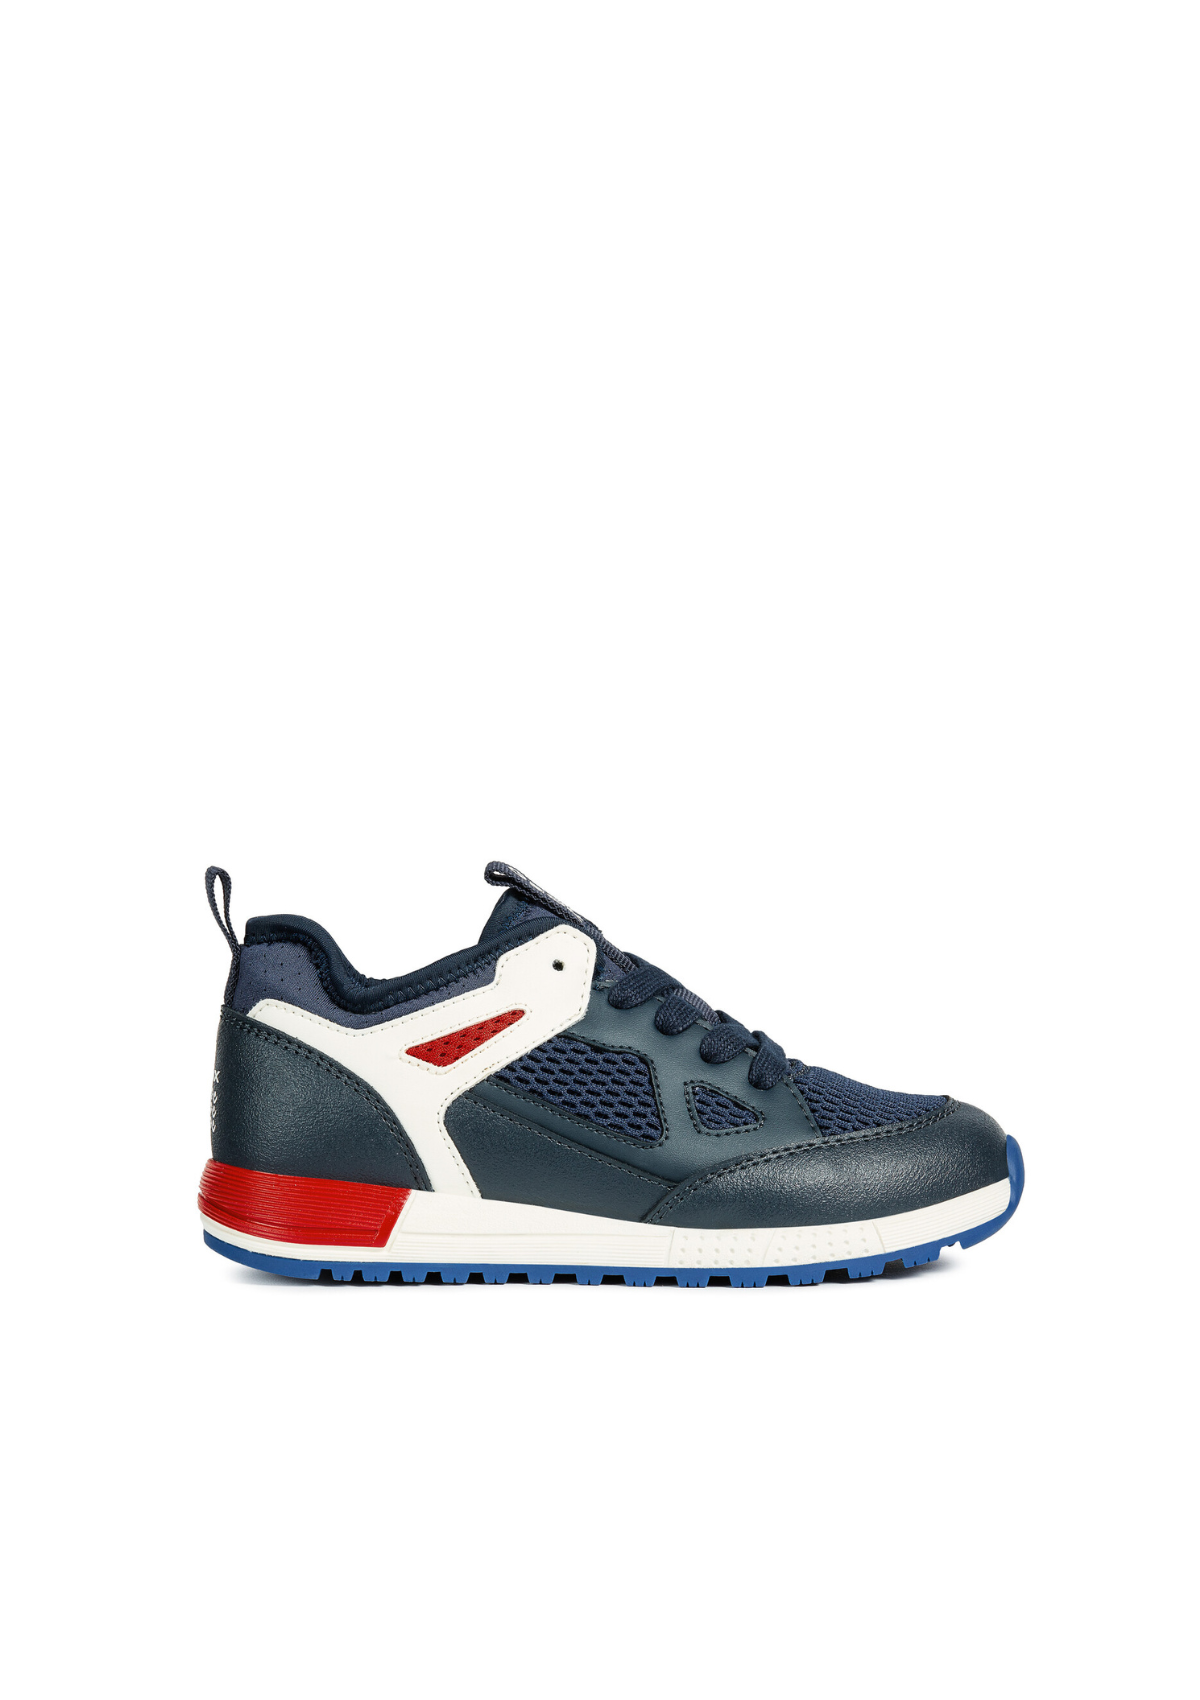 Geox Boys Trainers ALBEN Navy Red